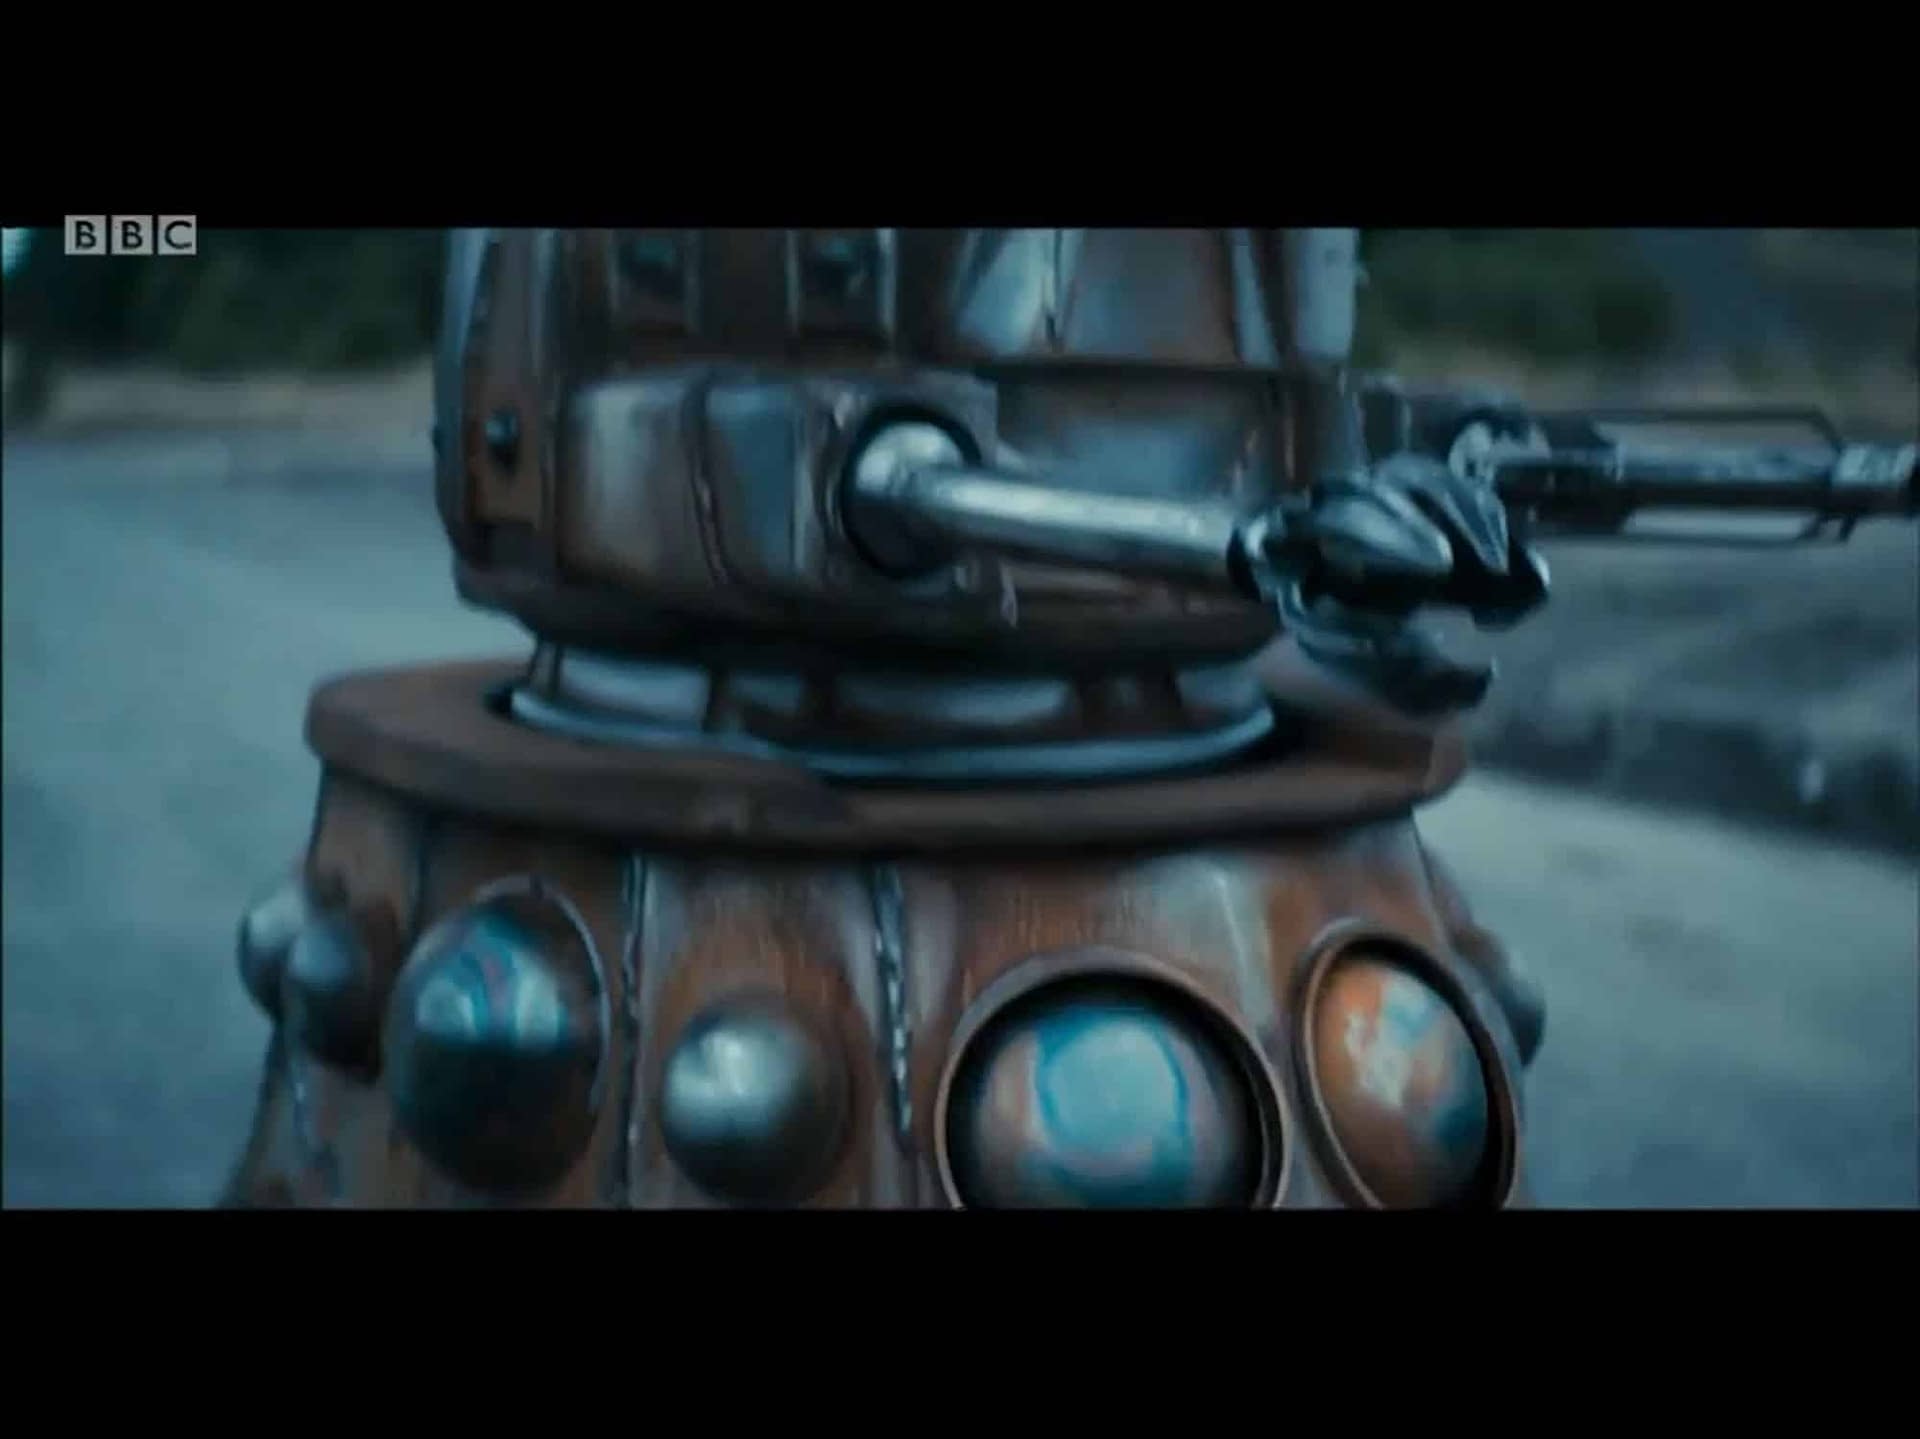 UPDATED: More Daleks from Tonight's Doctor Who: Resolution (Spoilers)